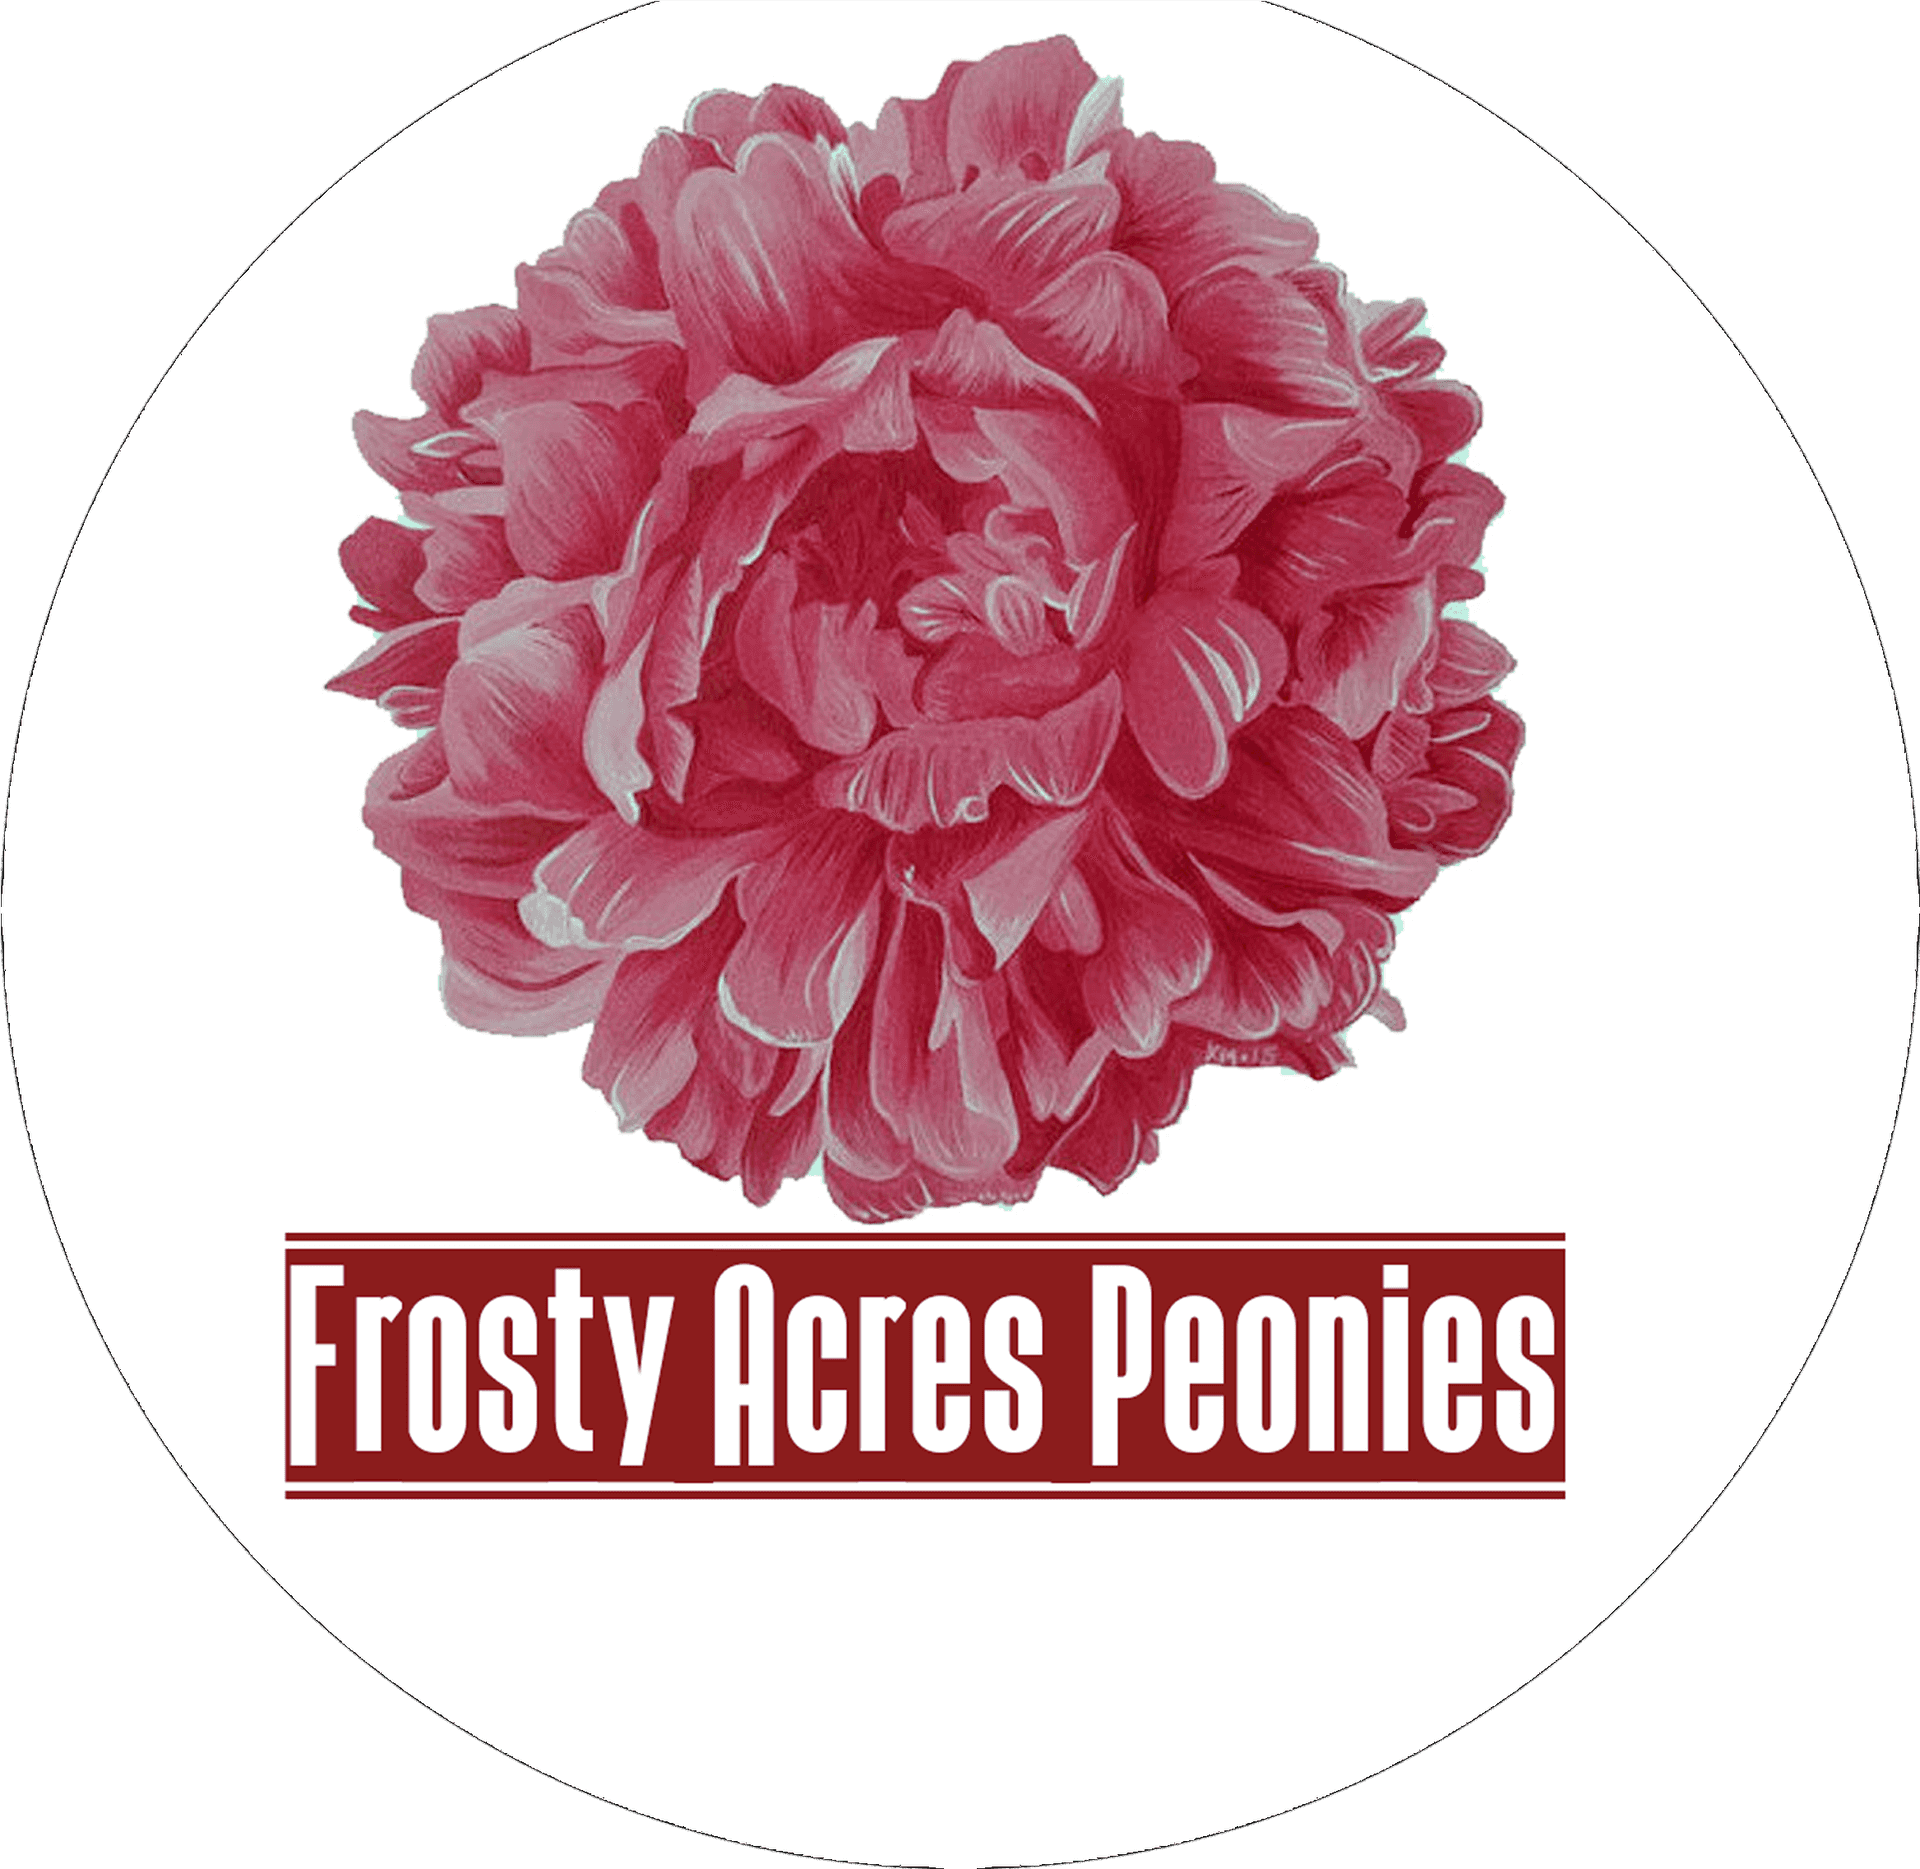 Frosty Acres Peonies Logo PNG